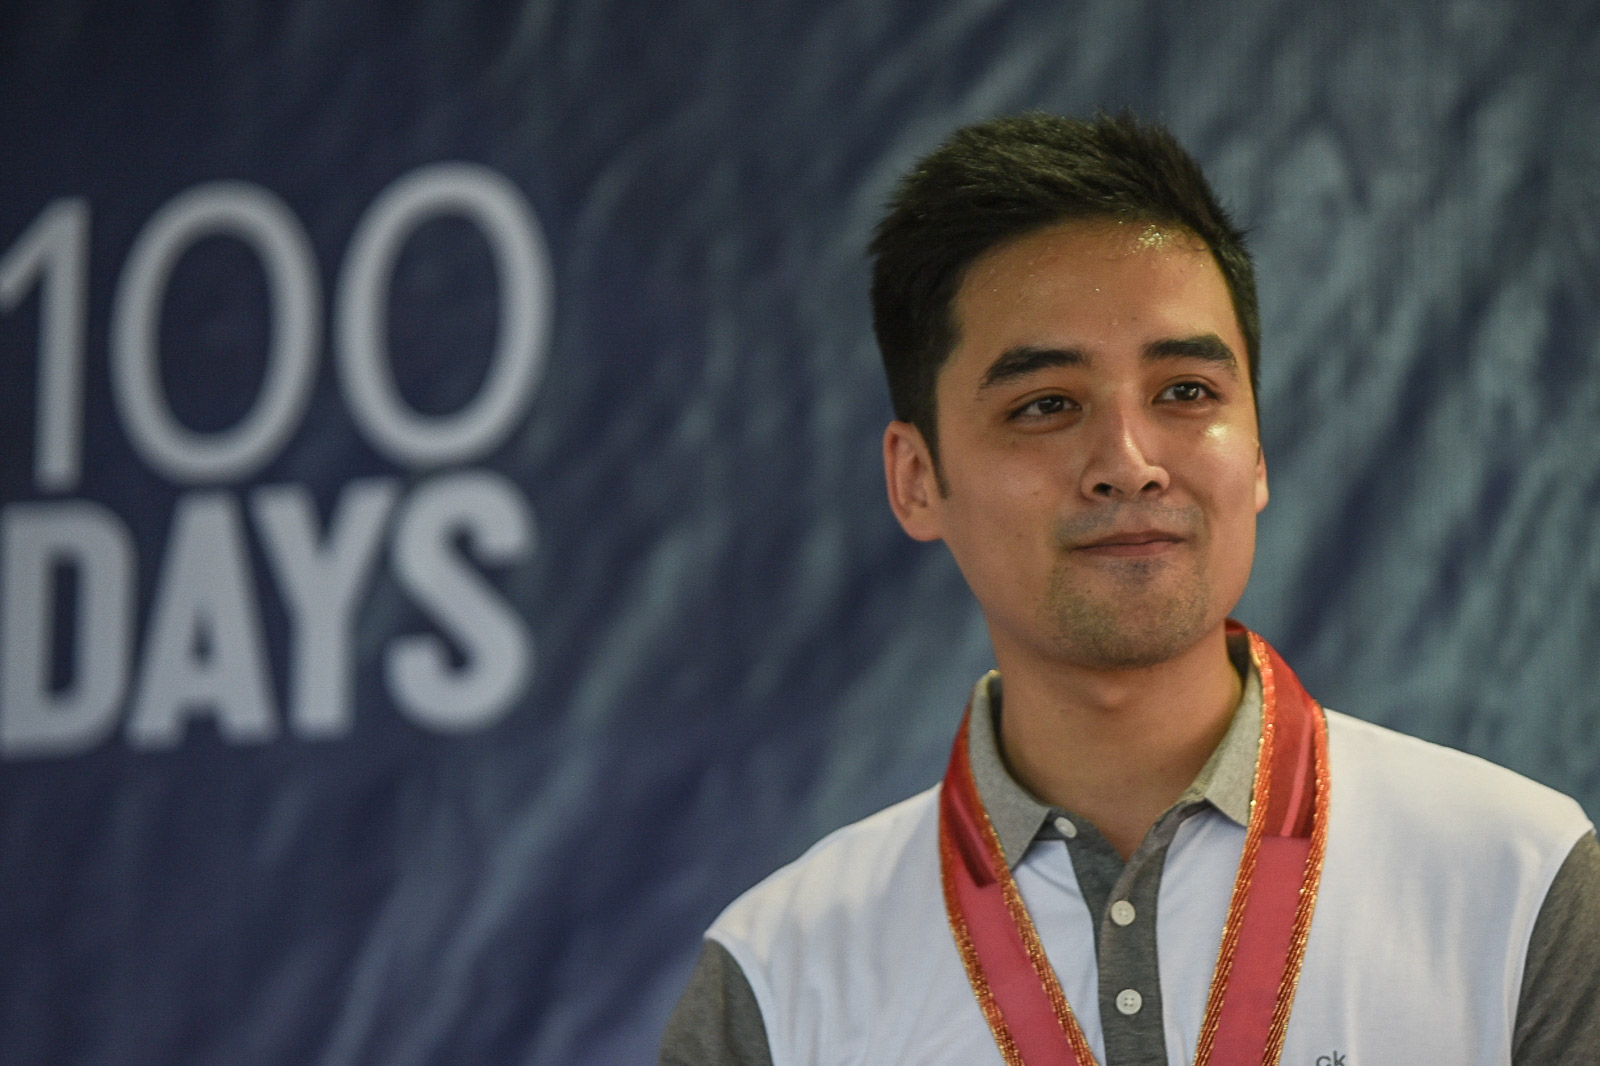 NUMBERS TALK. Pasig City Mayor Vico Sotto highlighted achievements in health care, education, housing, social services, and good governance as he marked his first 100 days in office on October 8, 2019. Photo by Lisa Marie David/Rappler 